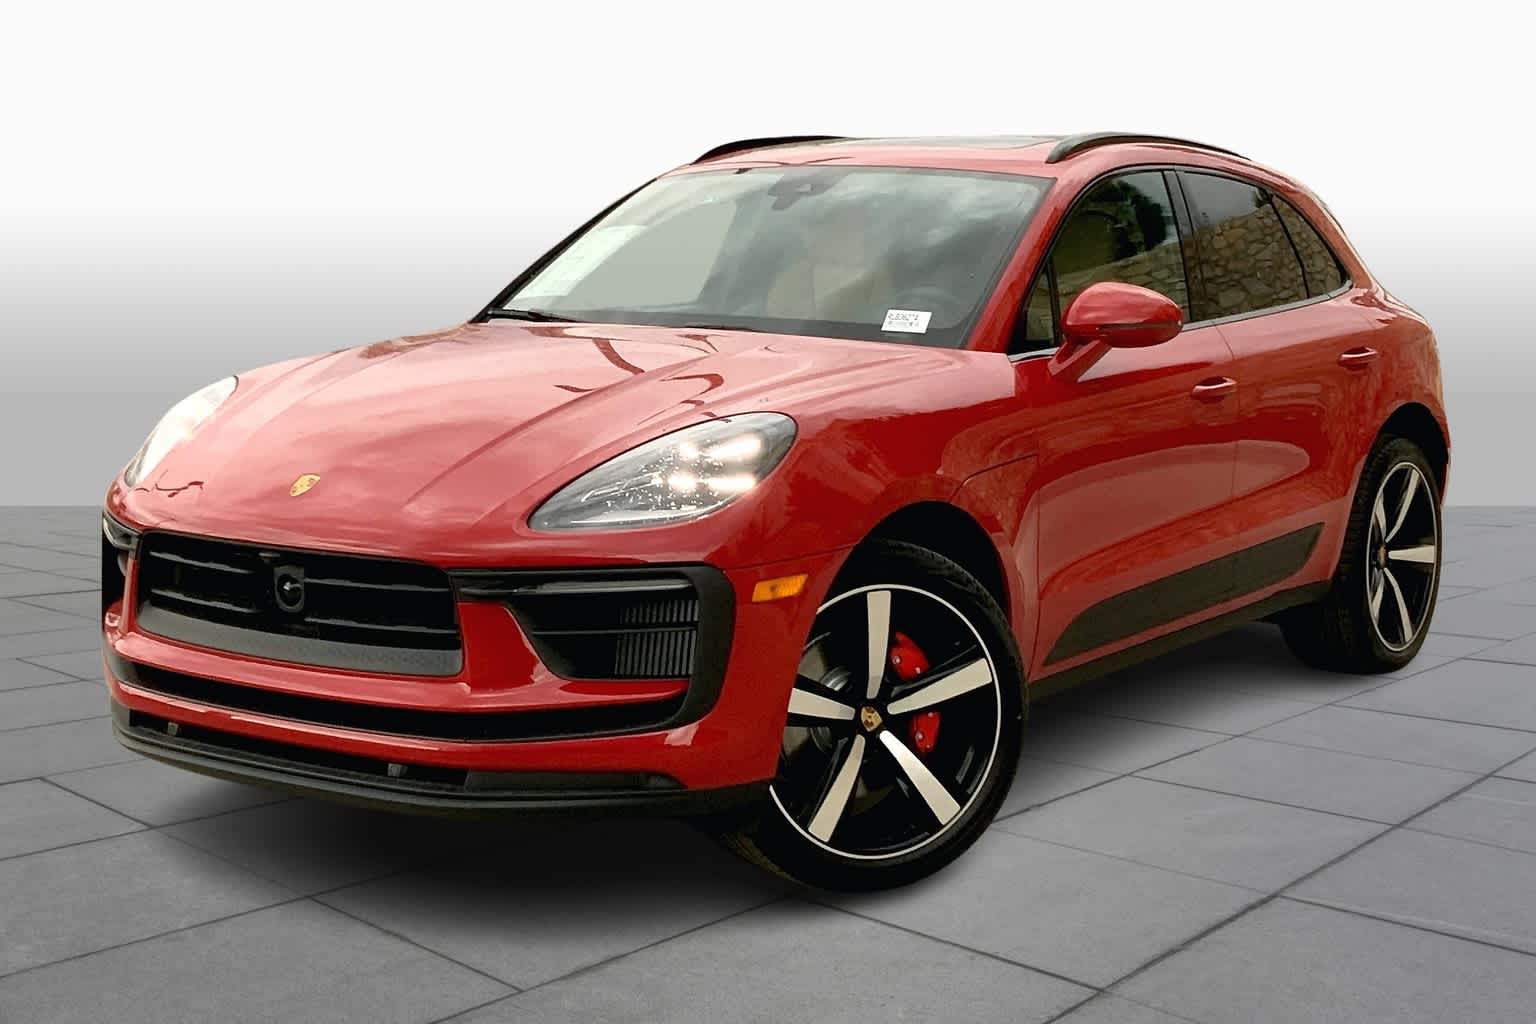 Front-angled view of a red Porsche Macan S